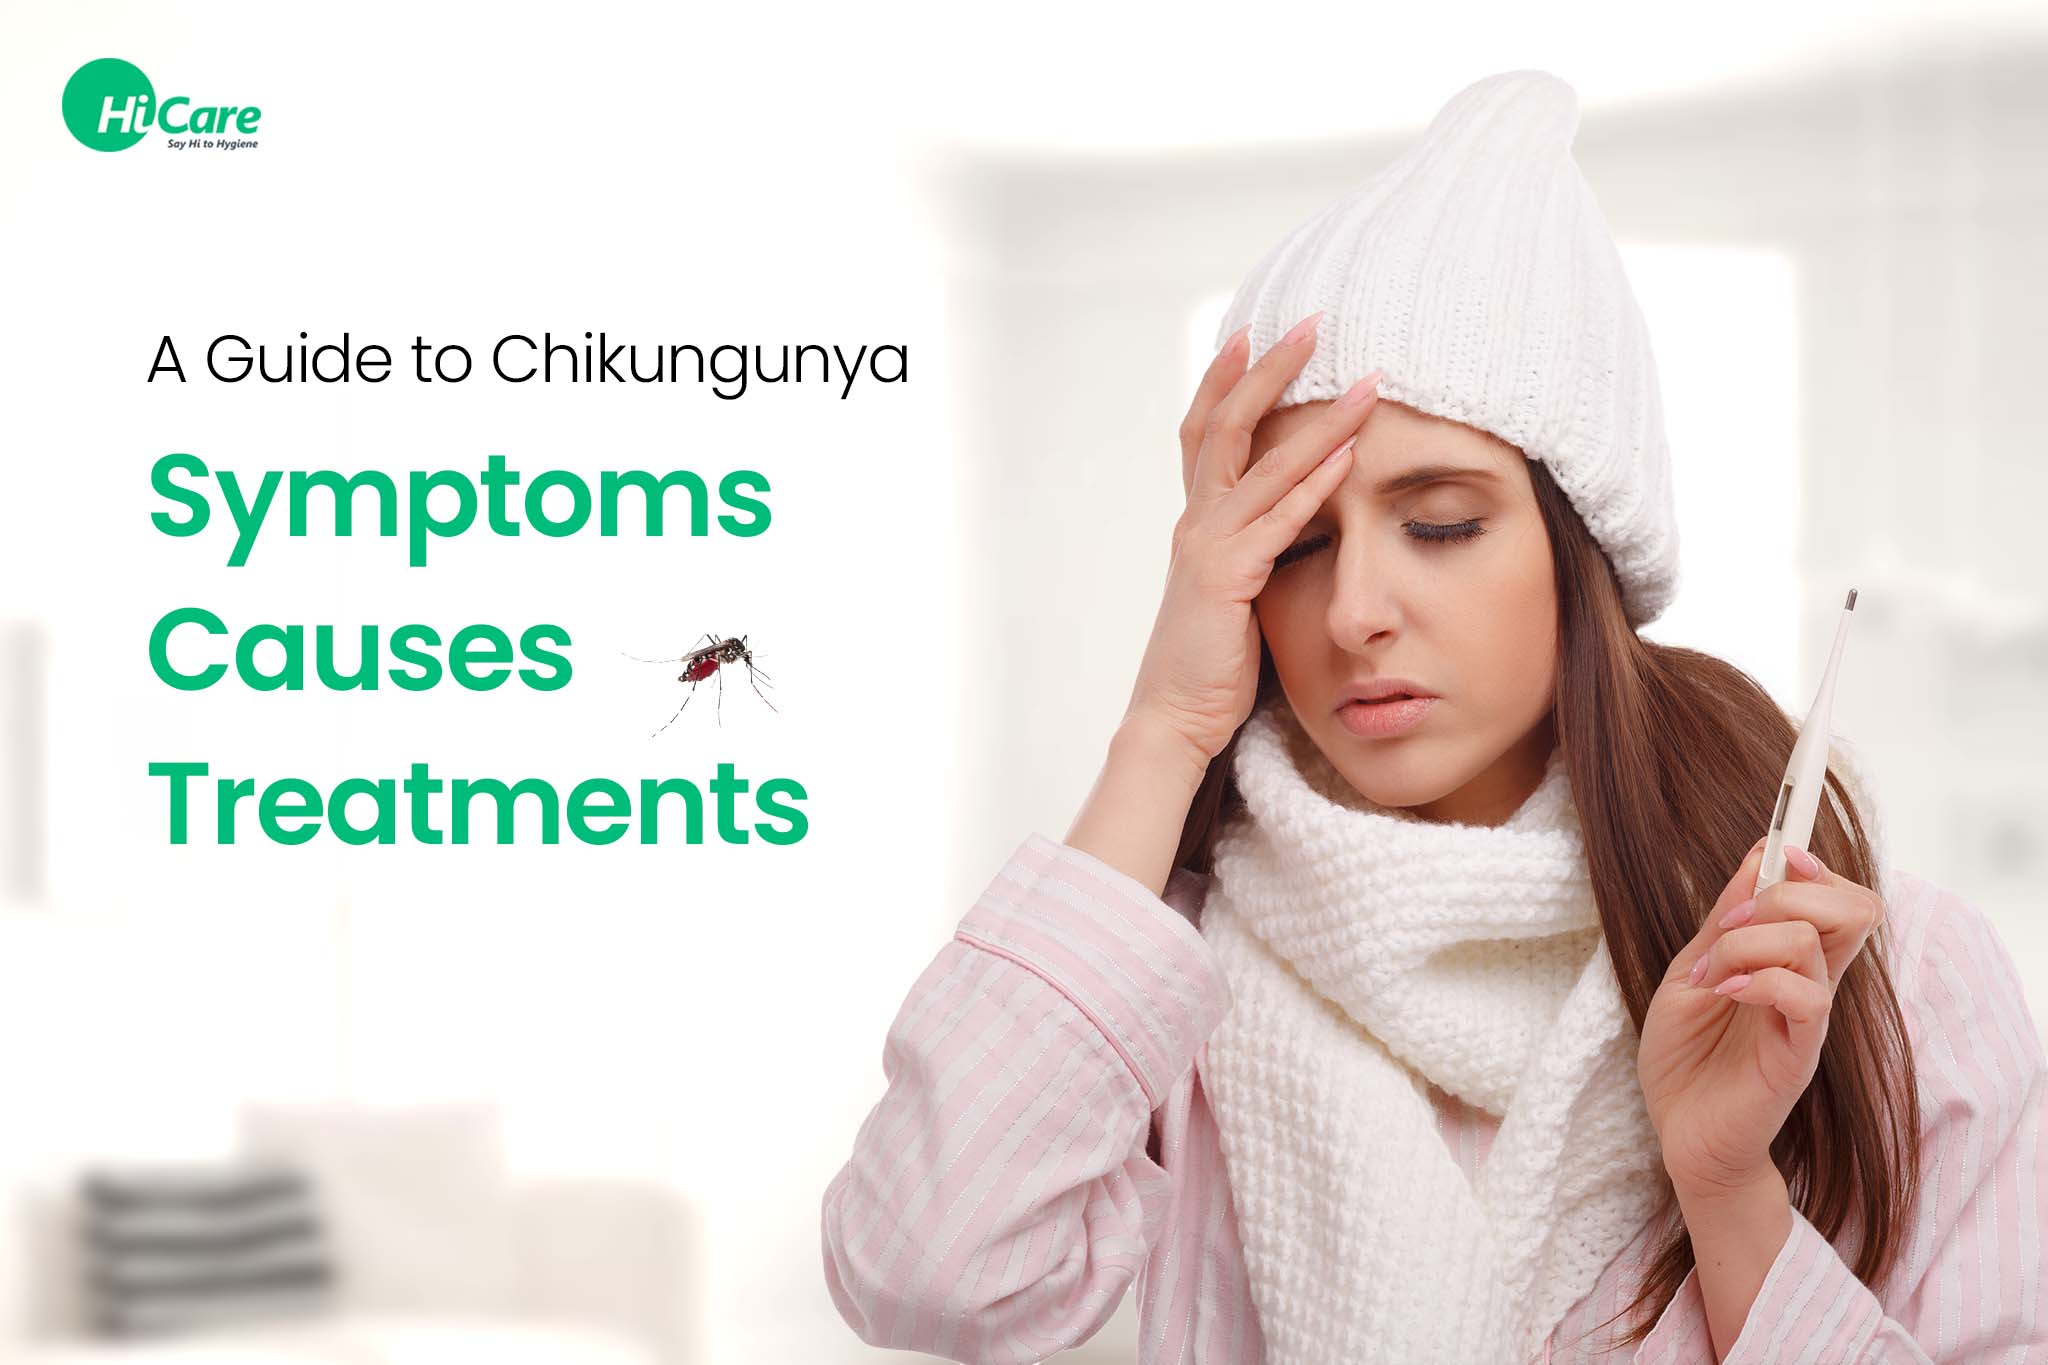 A Guide to Chikungunya Disease – Symptoms, Causes, Treatments, and Recovery